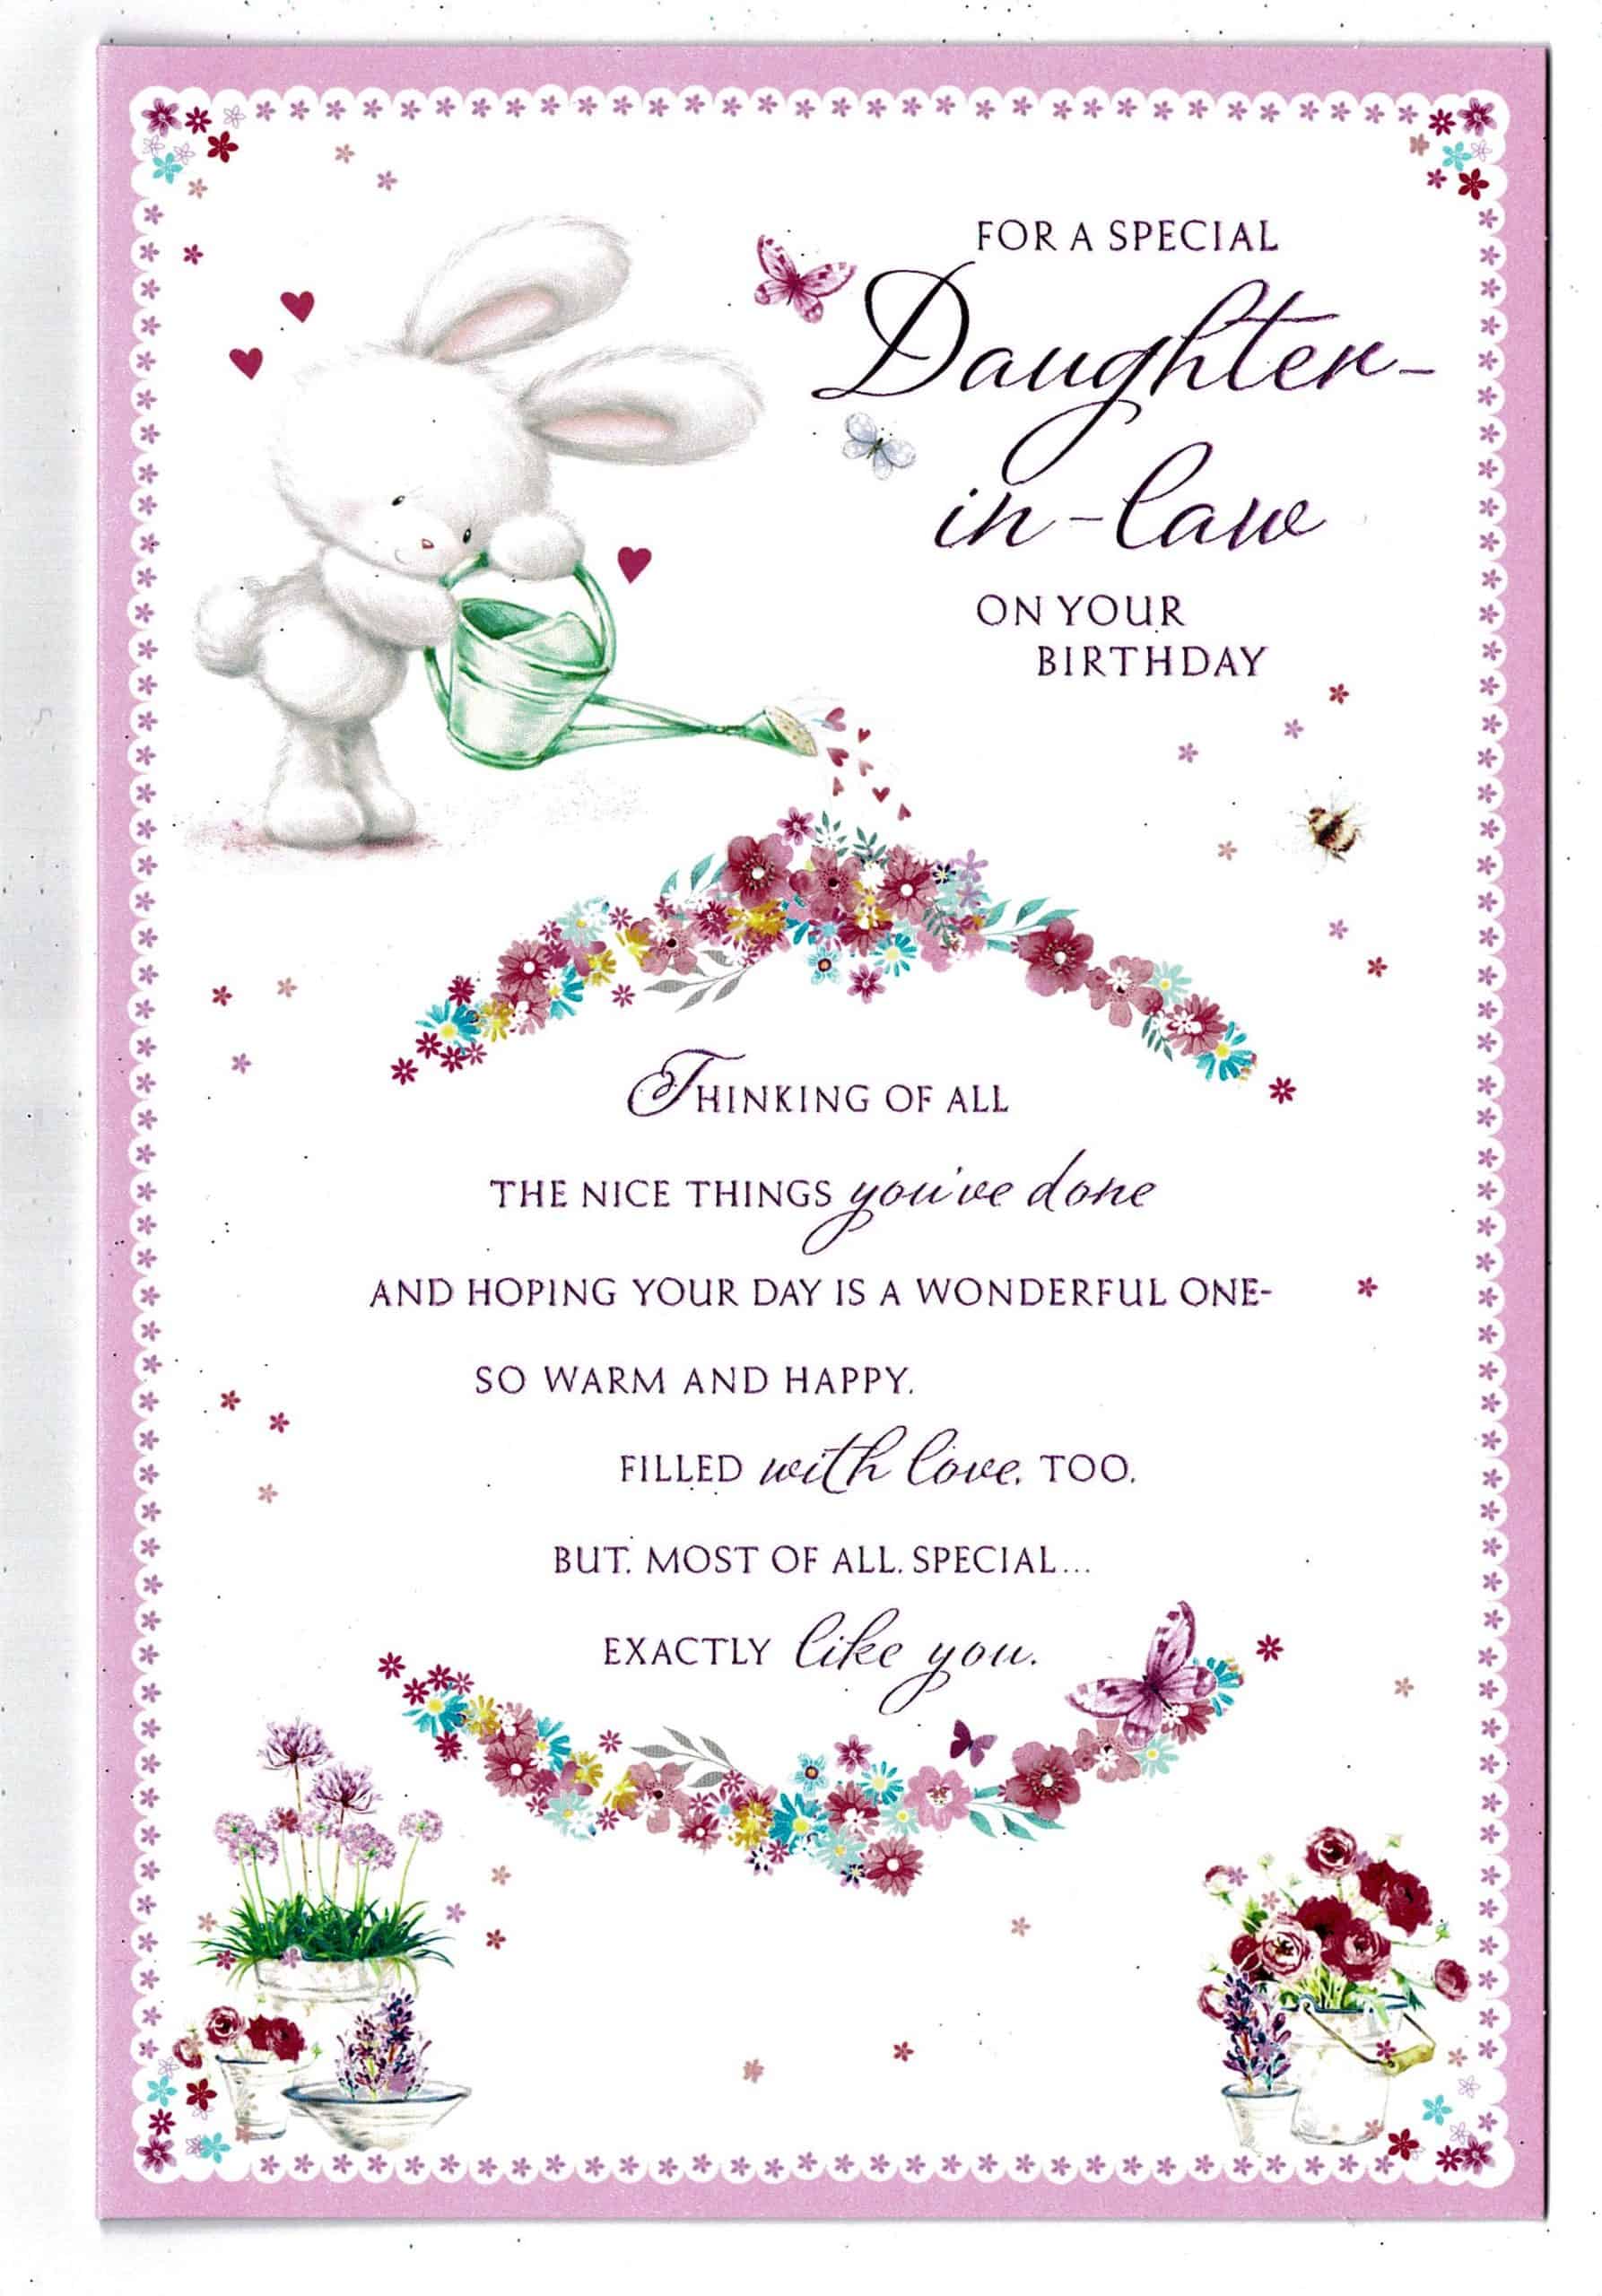 daughter-in-law-birthday-card-for-a-special-daughter-in-law-on-your